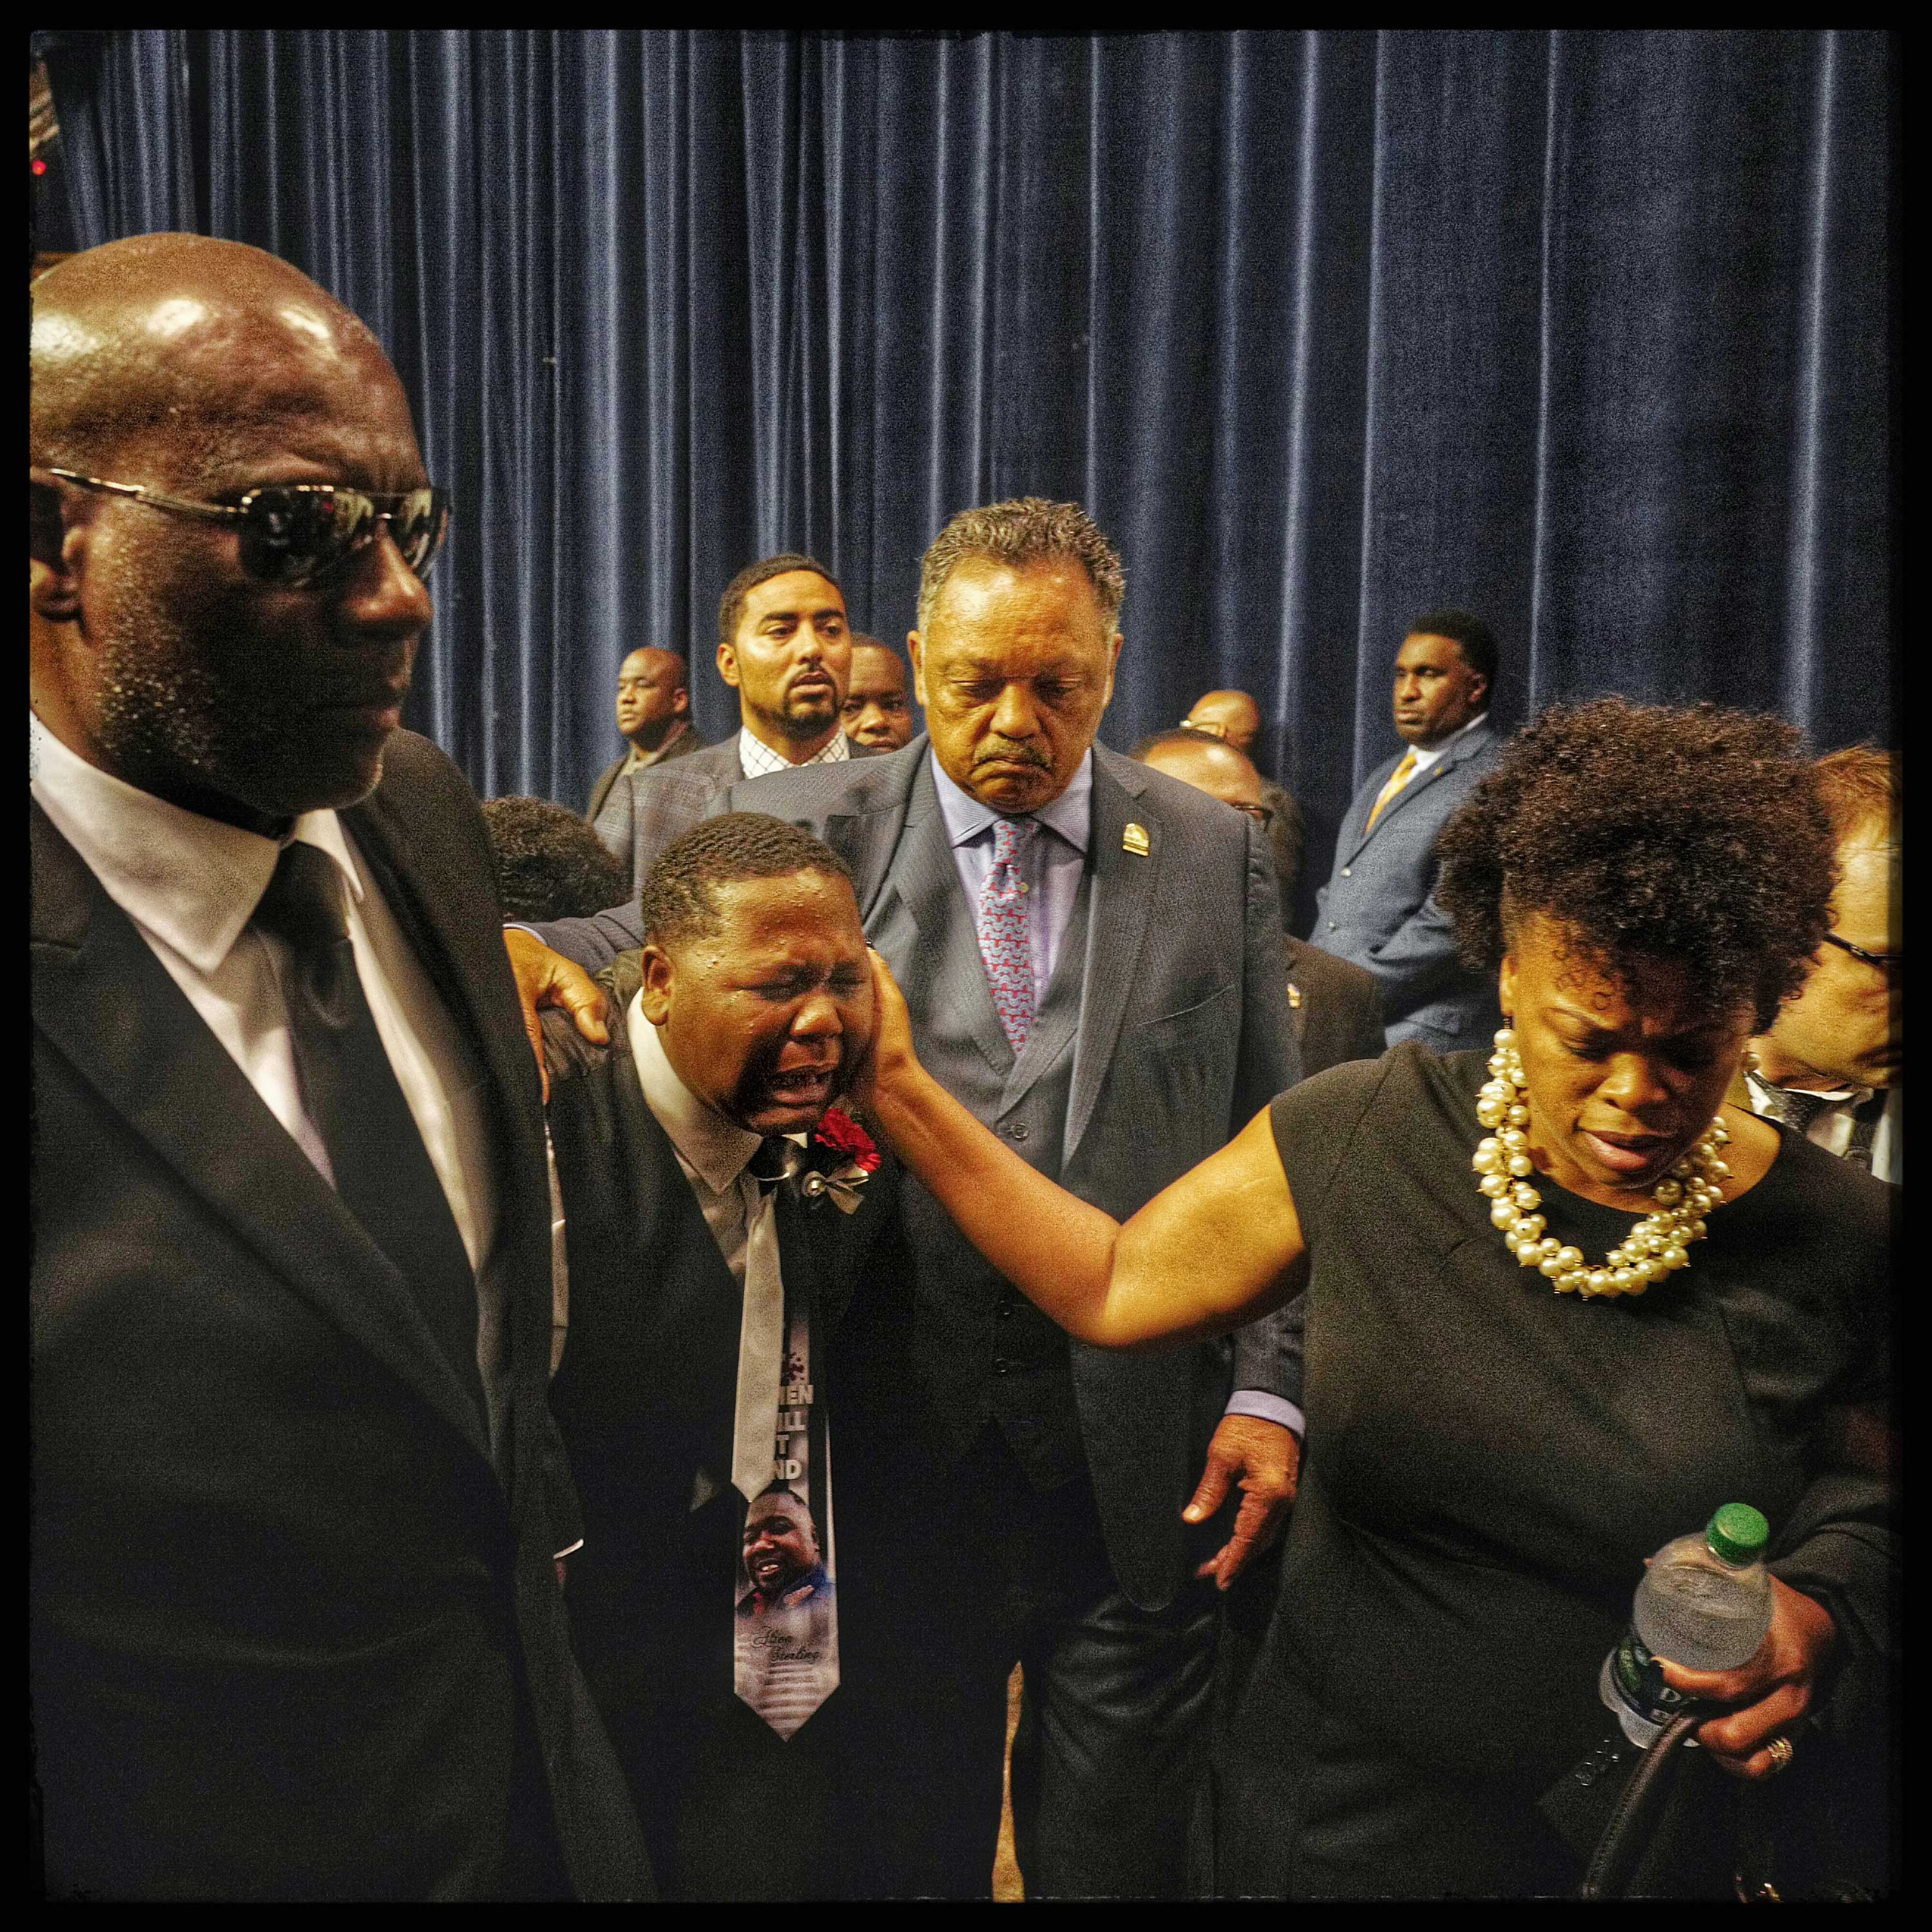 Baton Rouge, La: Fifteen-year-old Cameron Sterling succumbs to the pain as he is led
                              out of the funeral of his father, Alton Sterling, accompanied by the Rev.
                              Jesse Jackson Sr. The funeral was held at the Southern University A&amp;M
                              College on July 15, 2016.